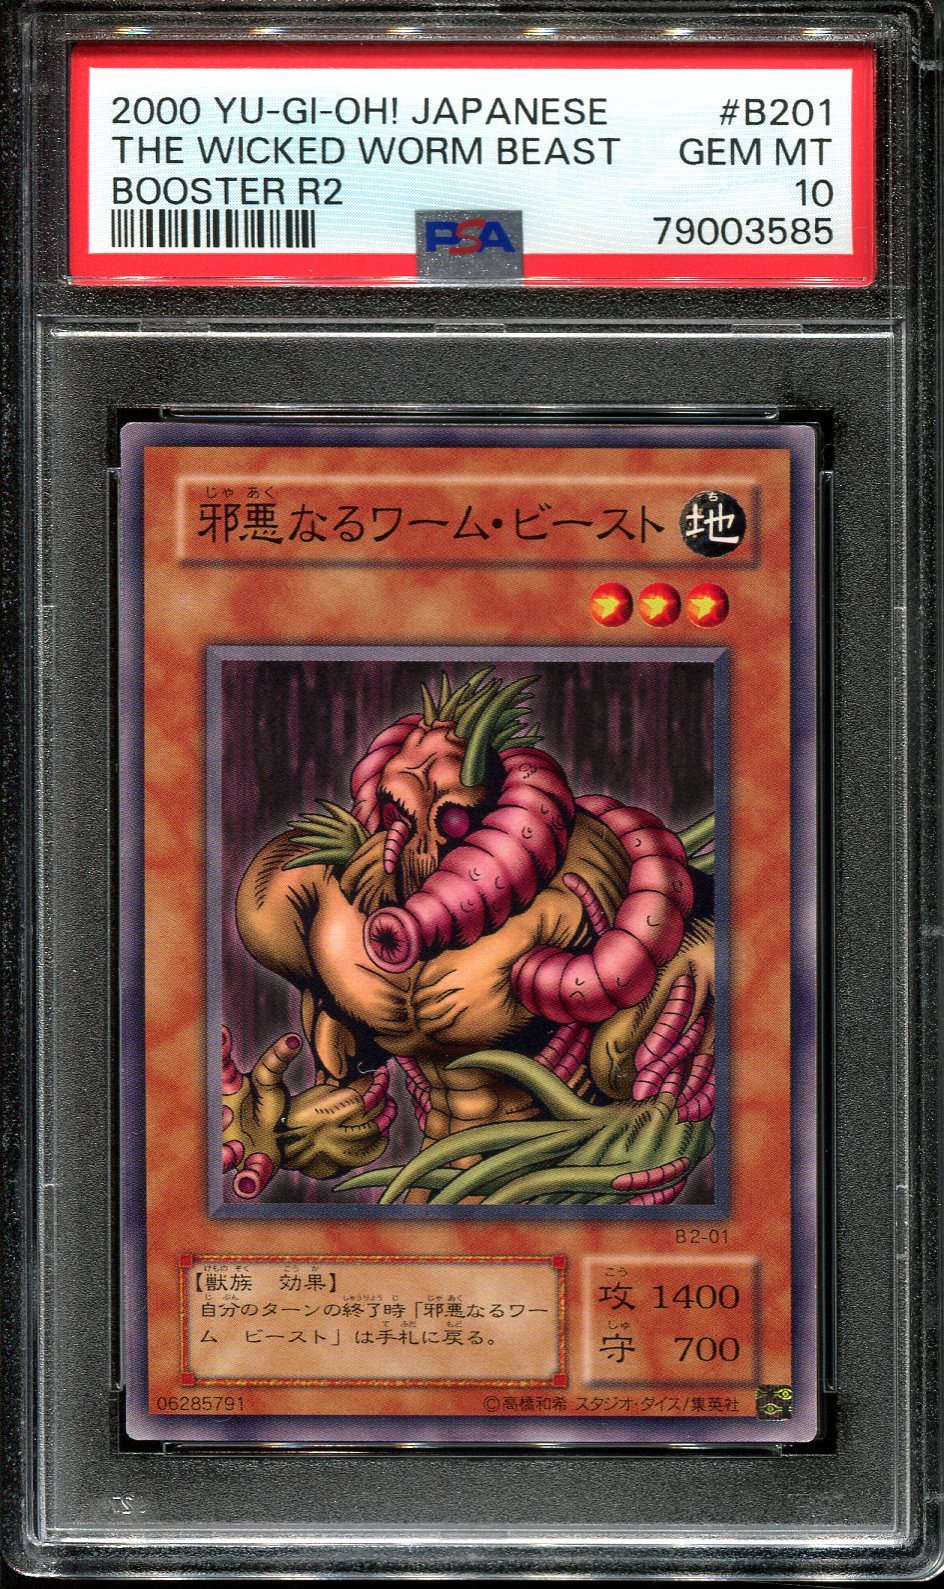 YUGIOH - PSA 10 - THE WICKED WORM BEAST - B2-01 - BOOSTER R2 - JAPANESE OCG